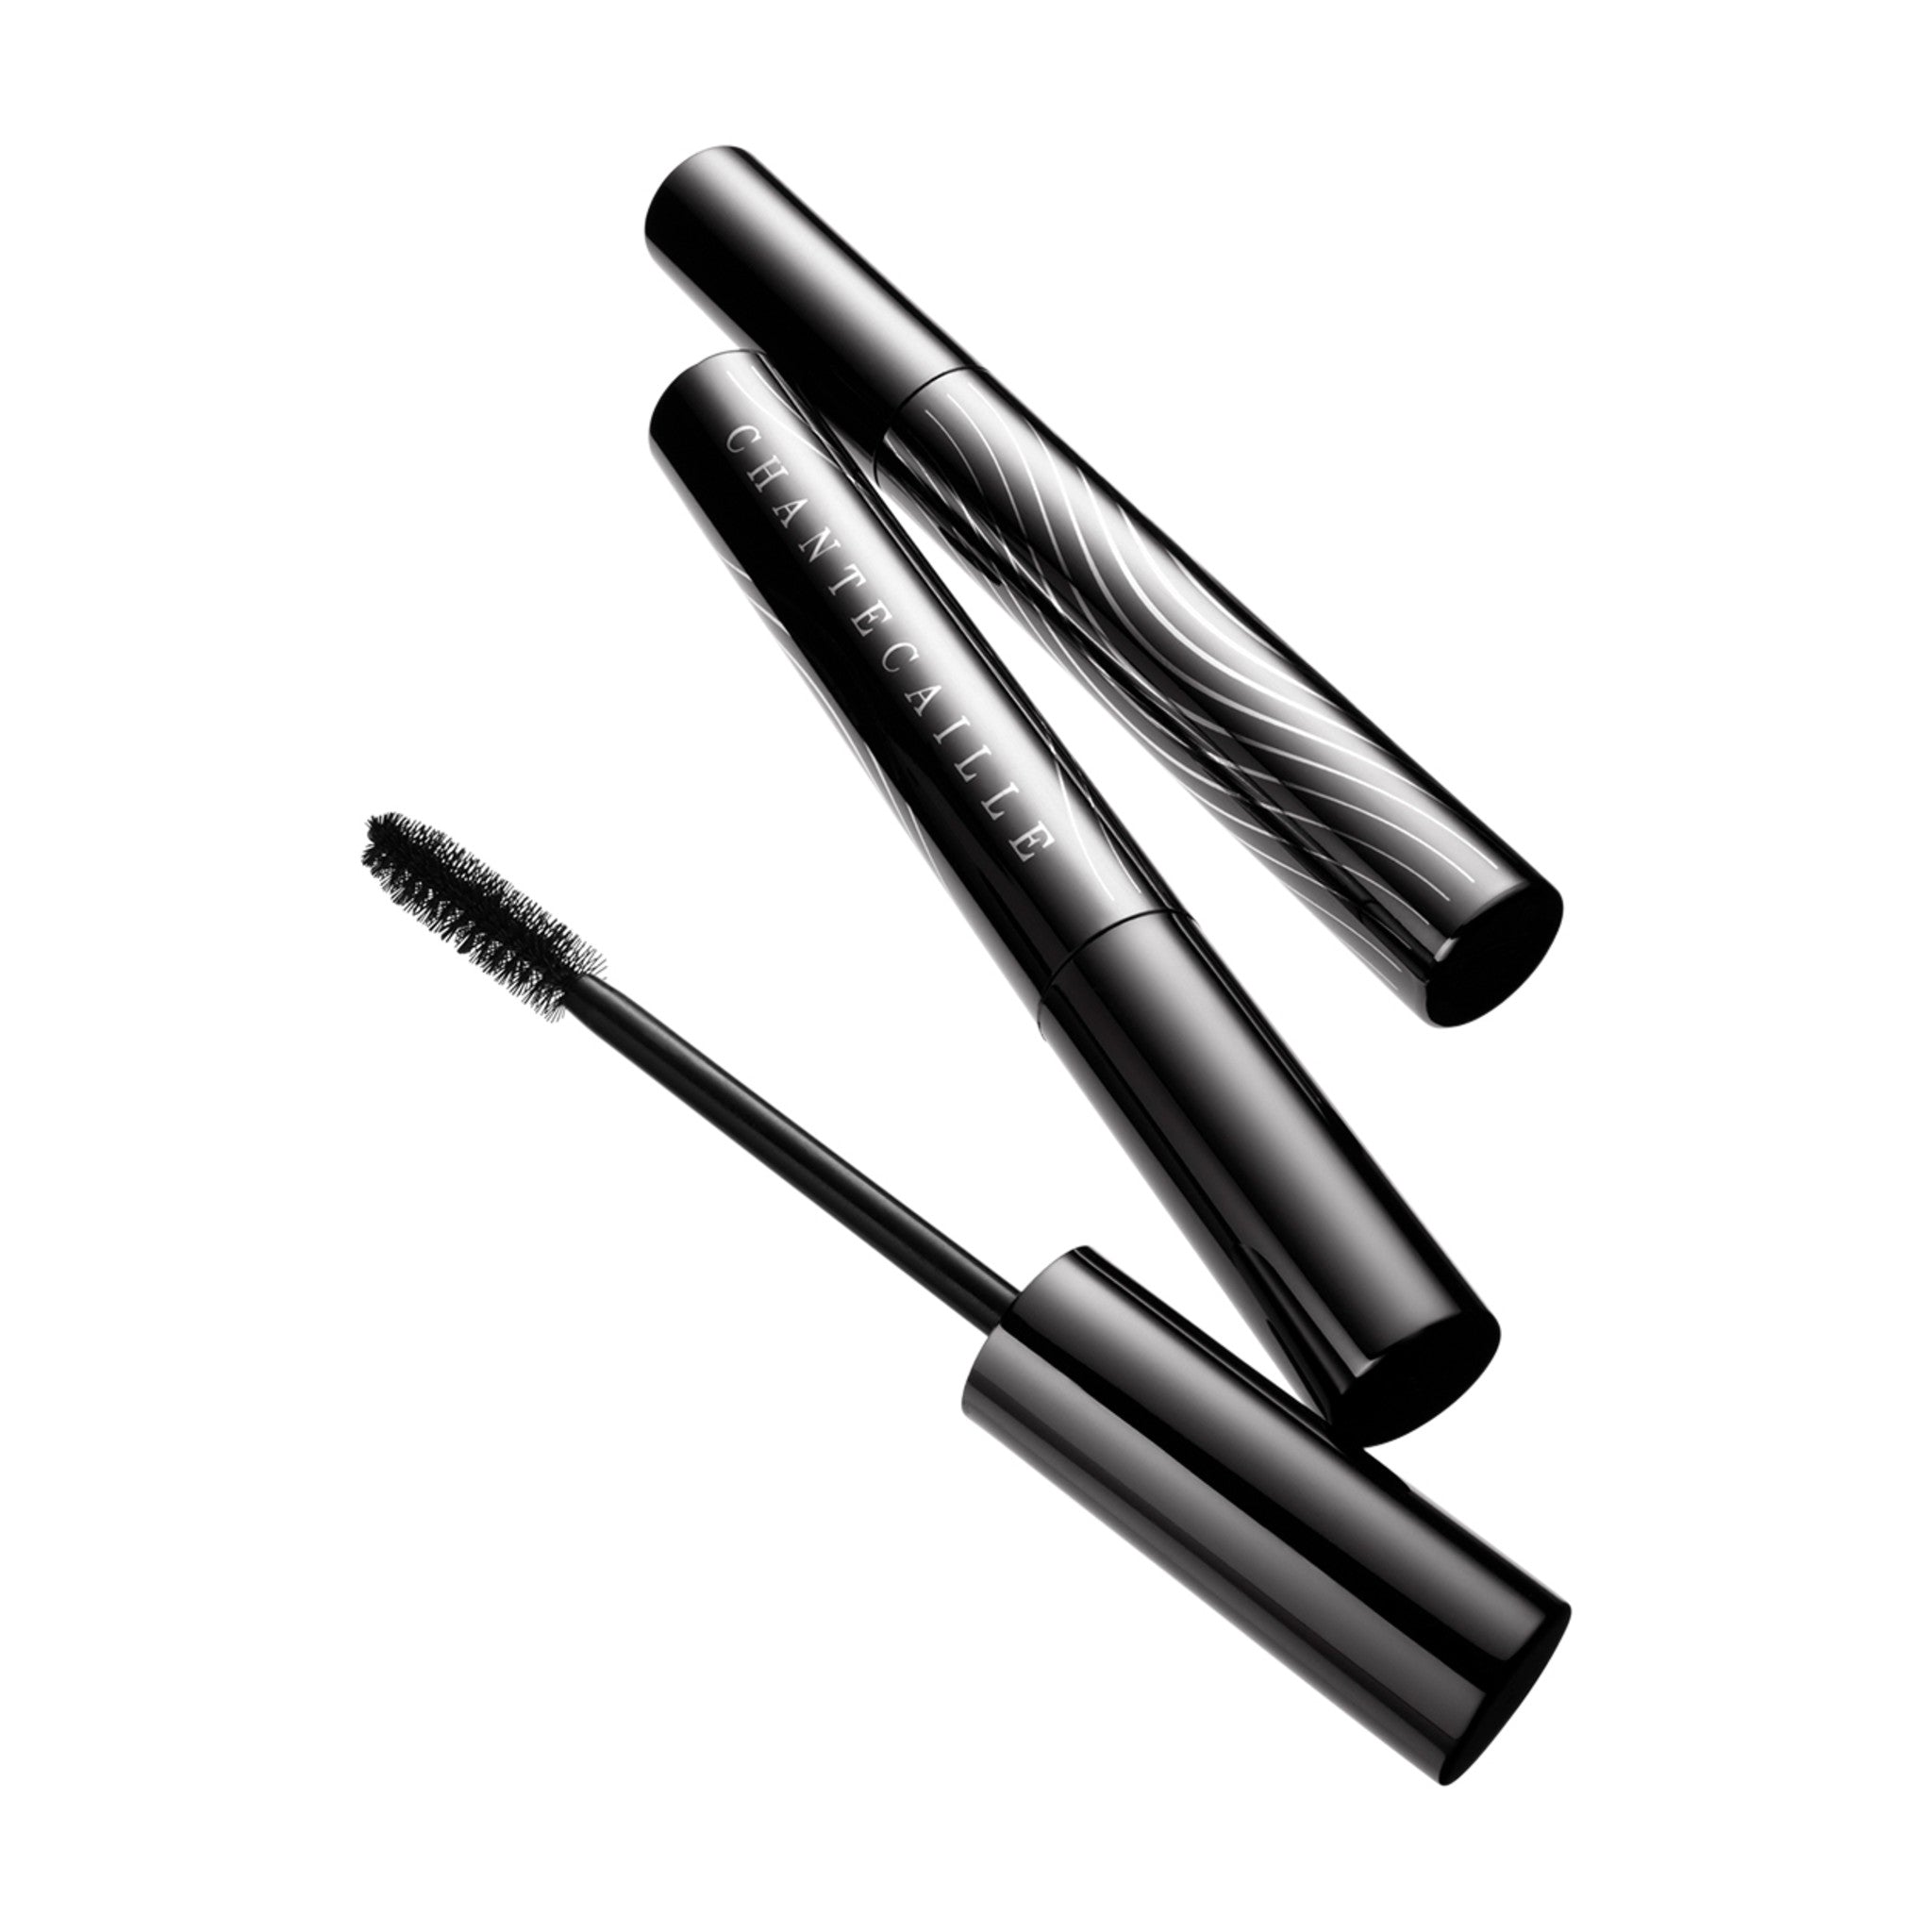 Chantecaille Longest Lash Faux Cils Mascara main image. This product is in the color black